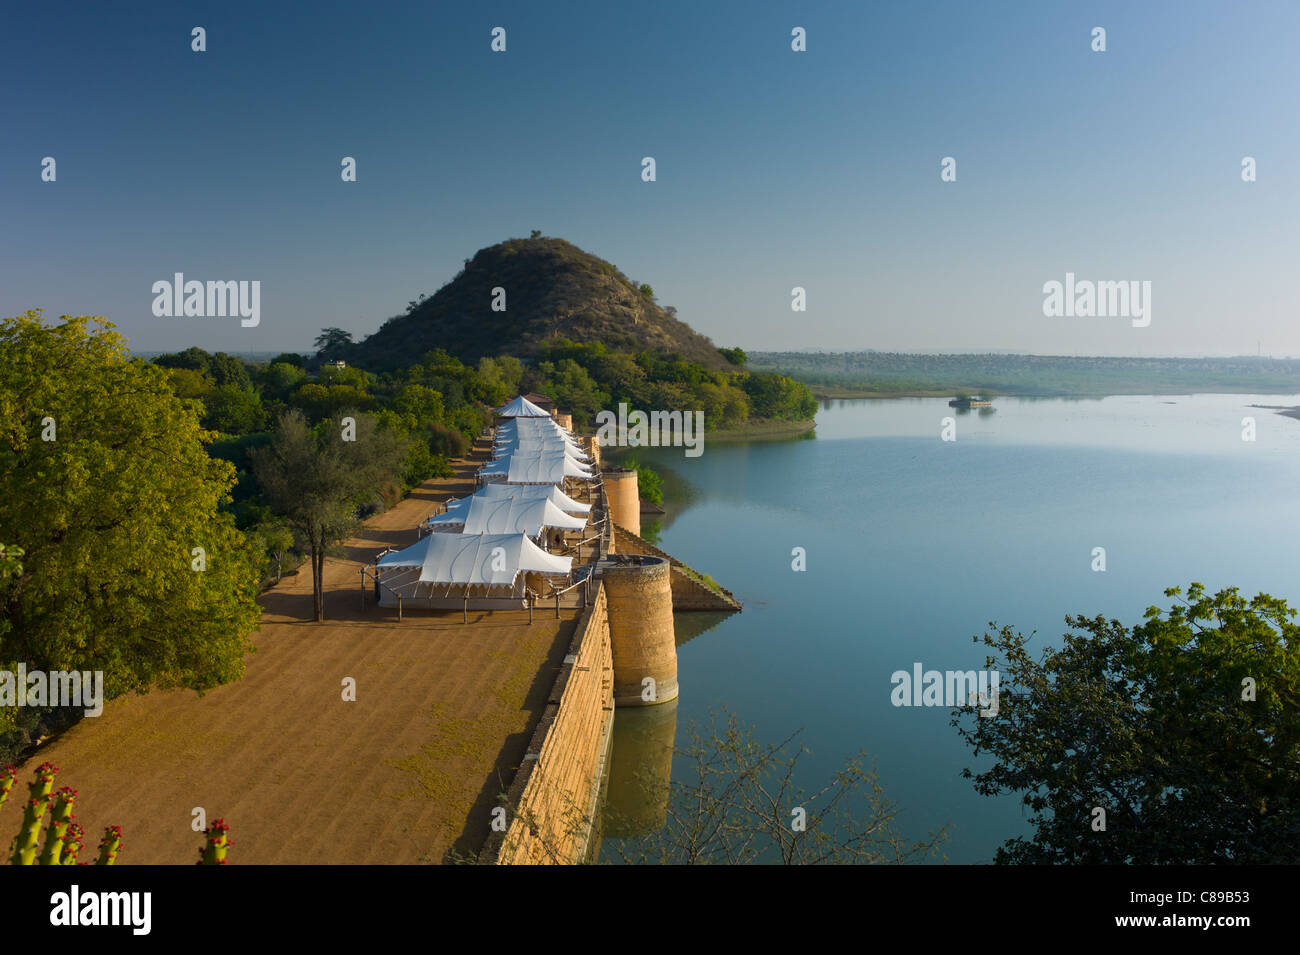 Chhatra Sagar reservoir and luxury tented camp oasis in the desert at Nimaj, Rajasthan, Northern India Stock Photo